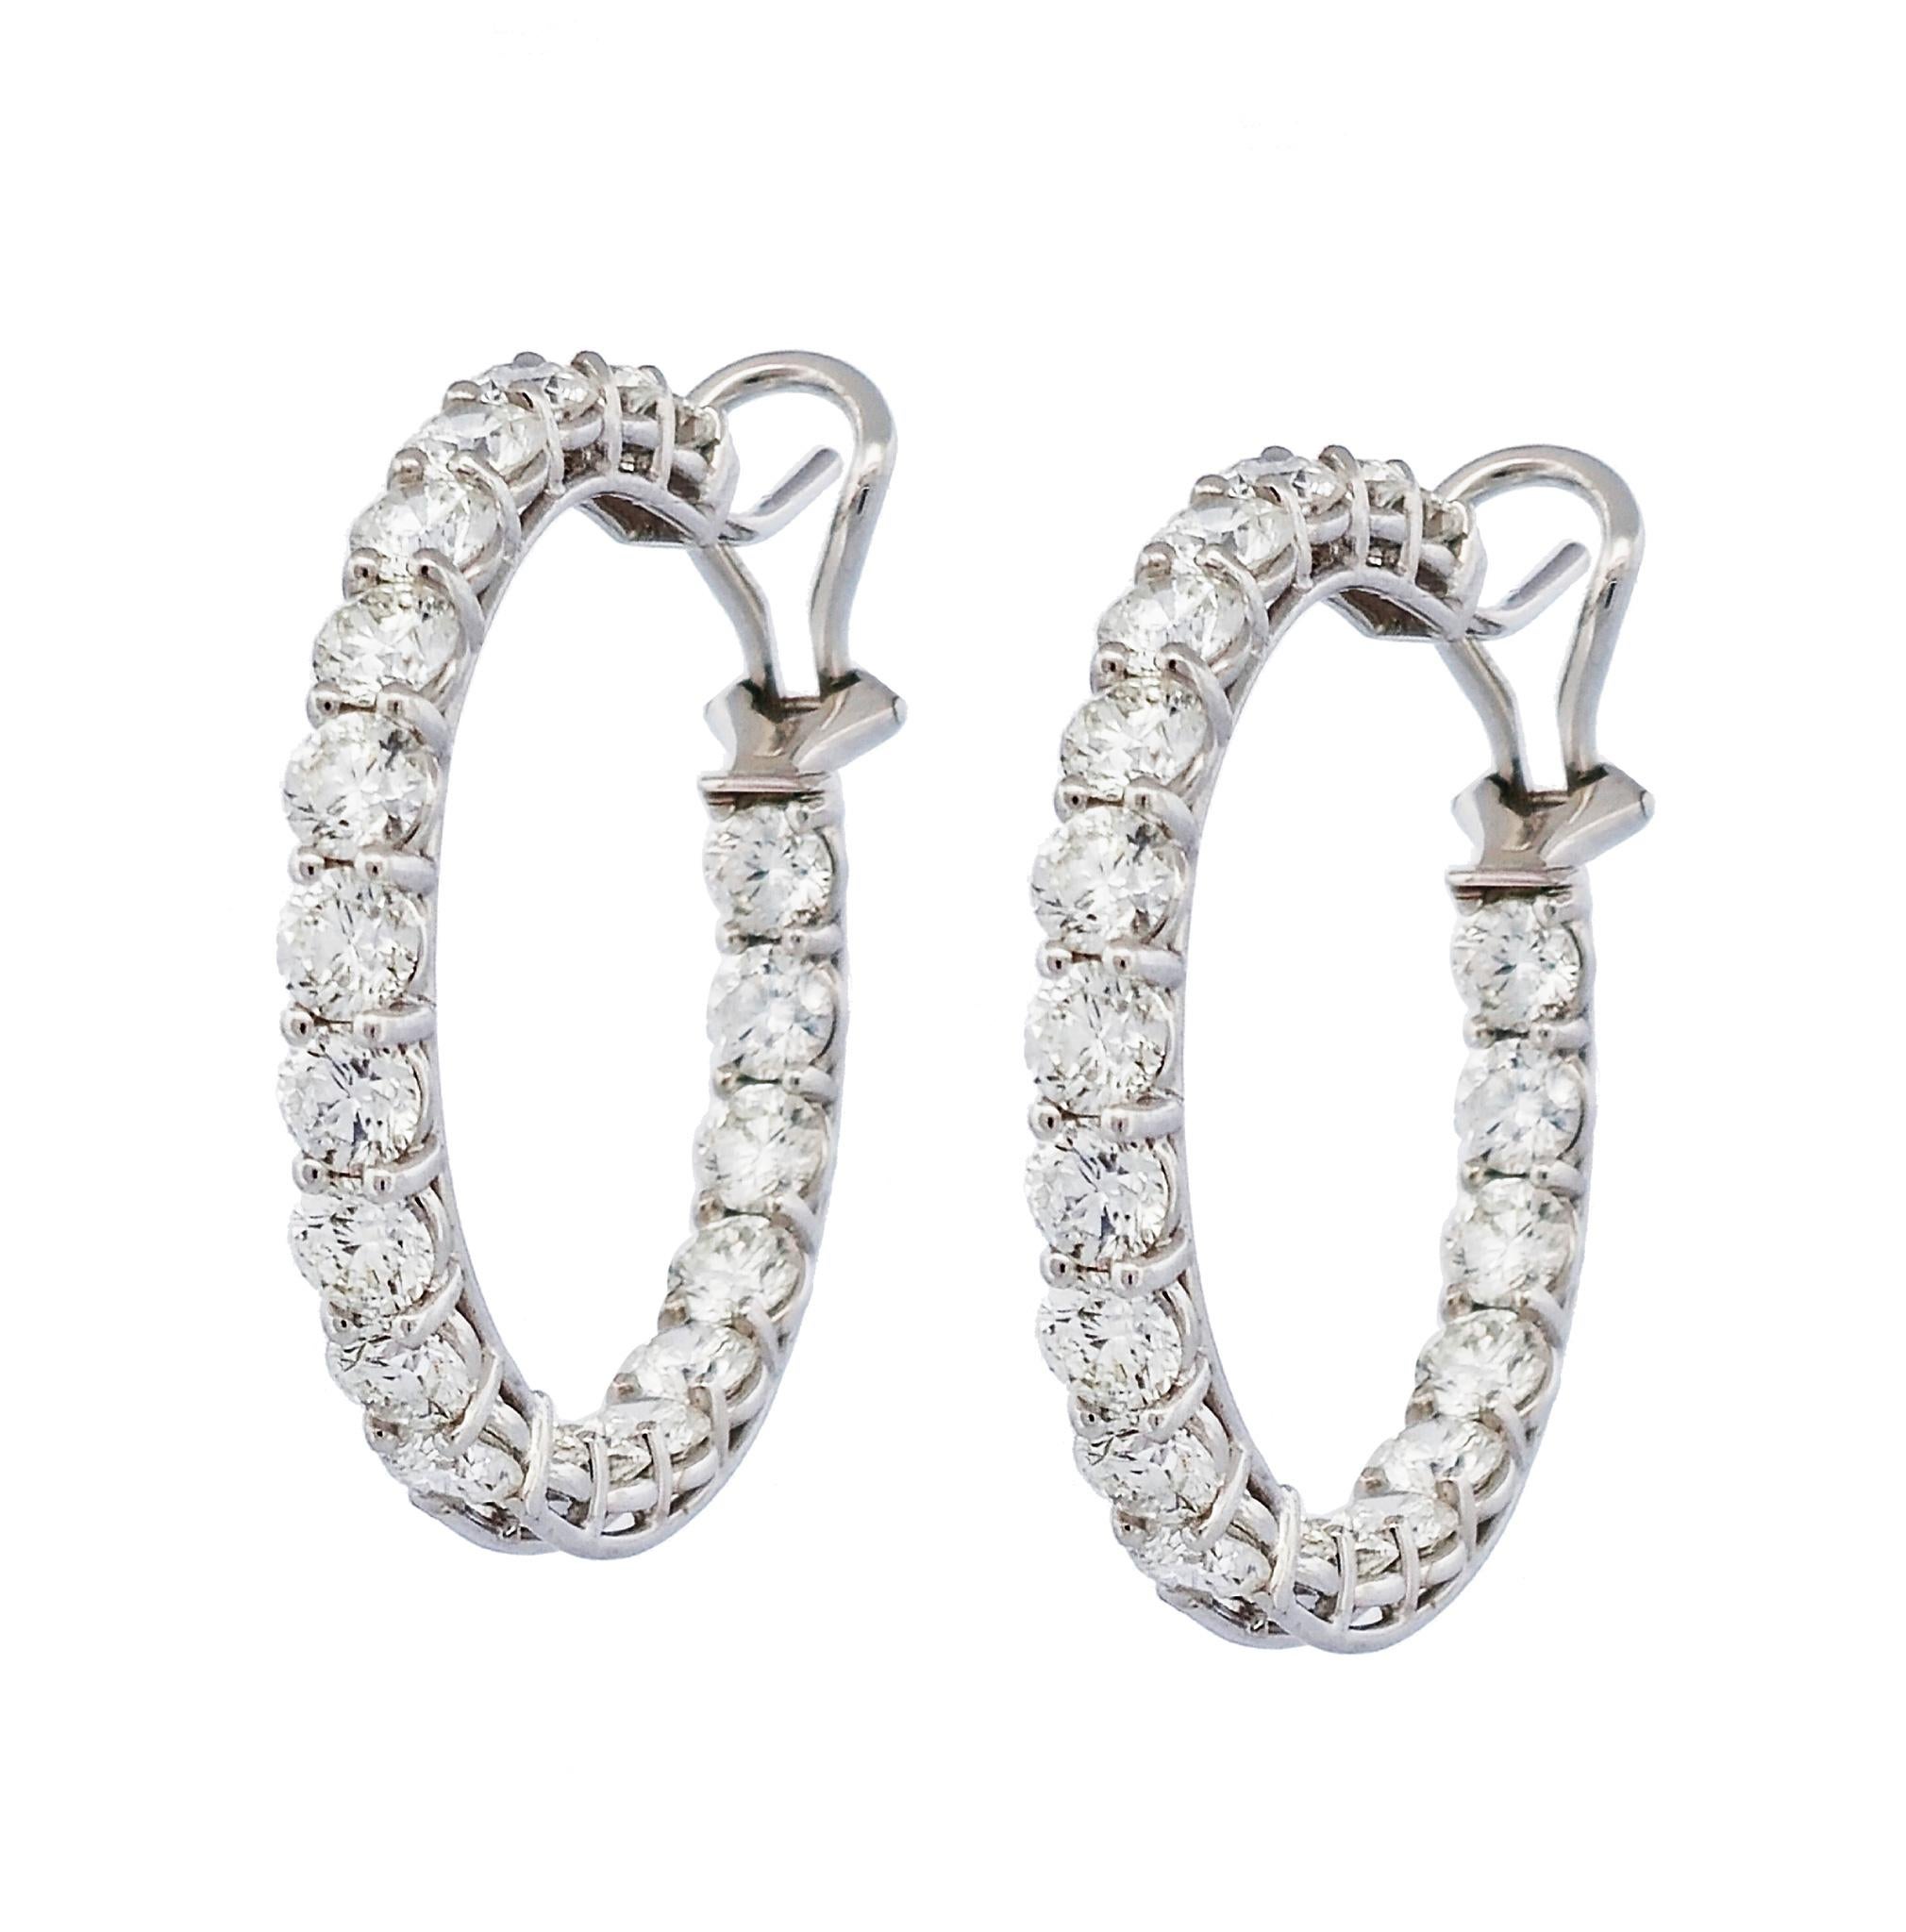 Luxurious Diamond Hoop Earrings from the Handmade H&H Collection are a stunning addition to any wardrobe. Crafted with 40 sparkling round brilliant cut diamonds, set in 18 karat white gold with a prong setting, these earrings will dazzle for years